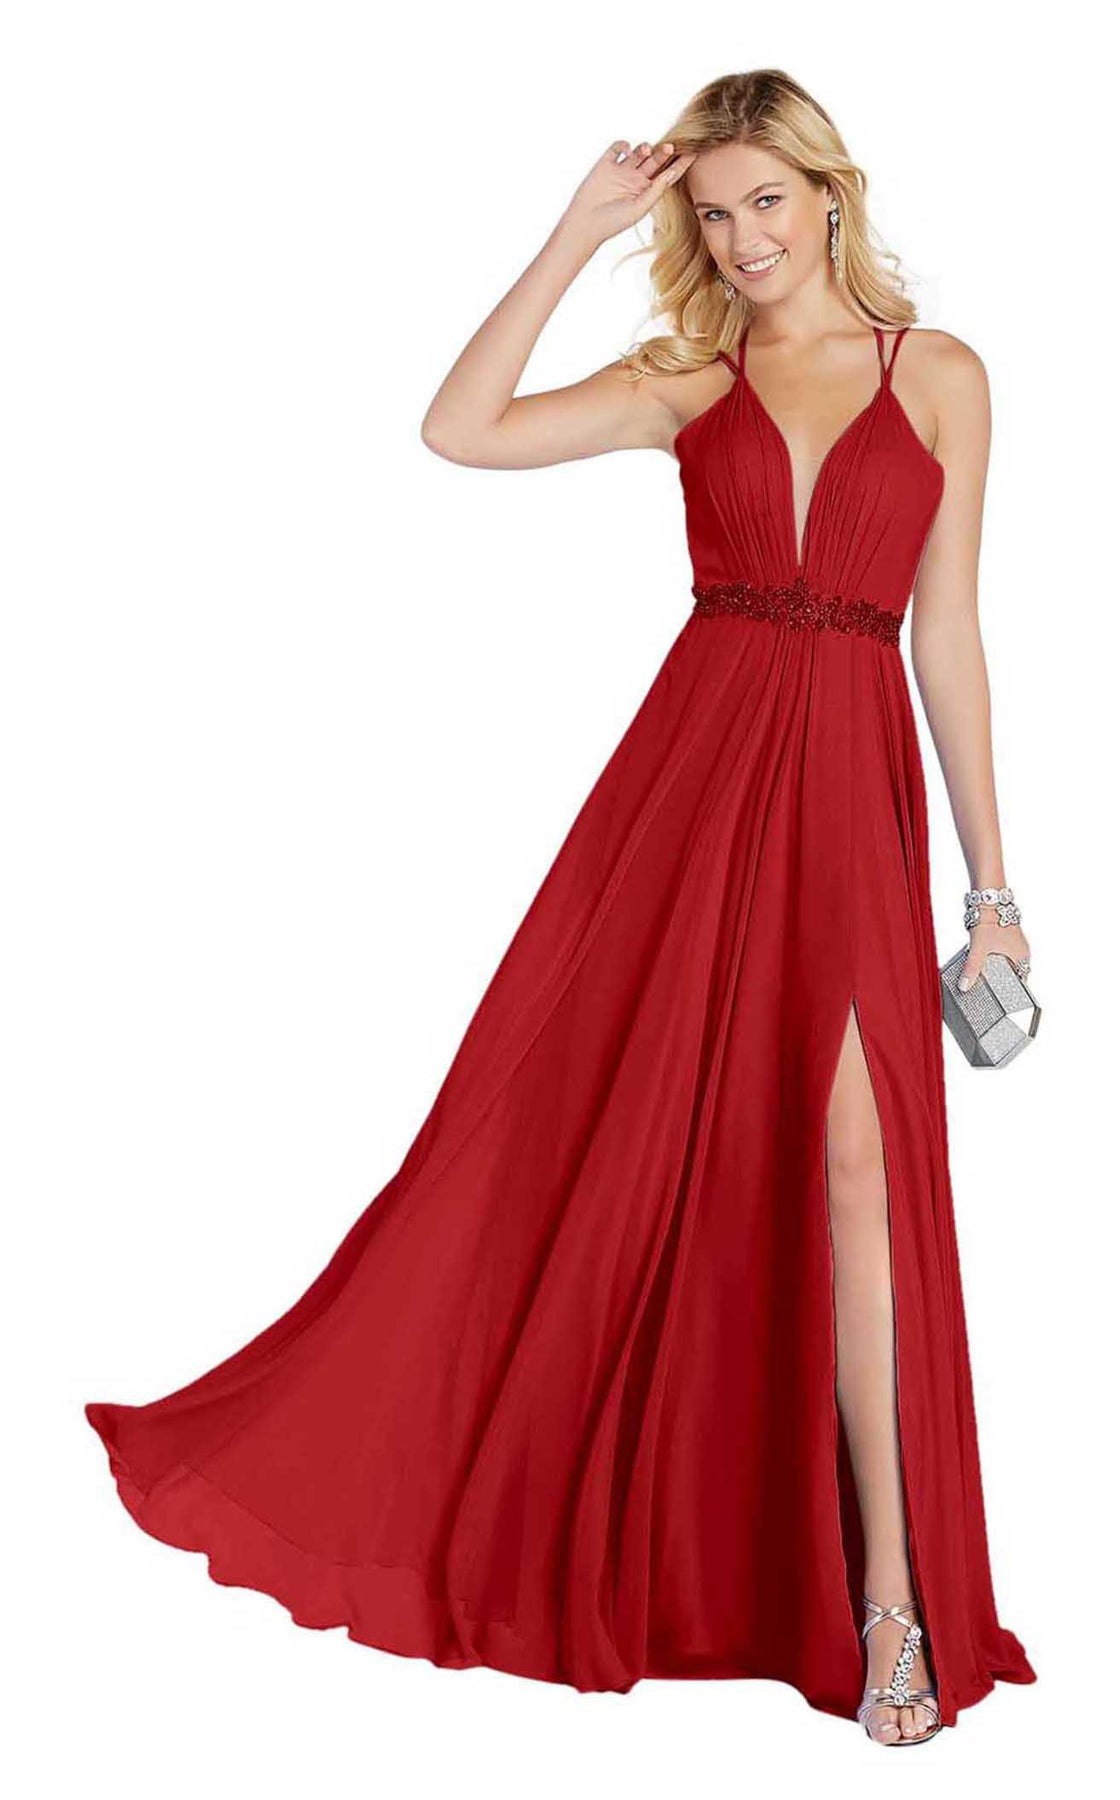 Alyce Paris - 60455 Plunging V-Neck High Slit Chiffon Gown in Red